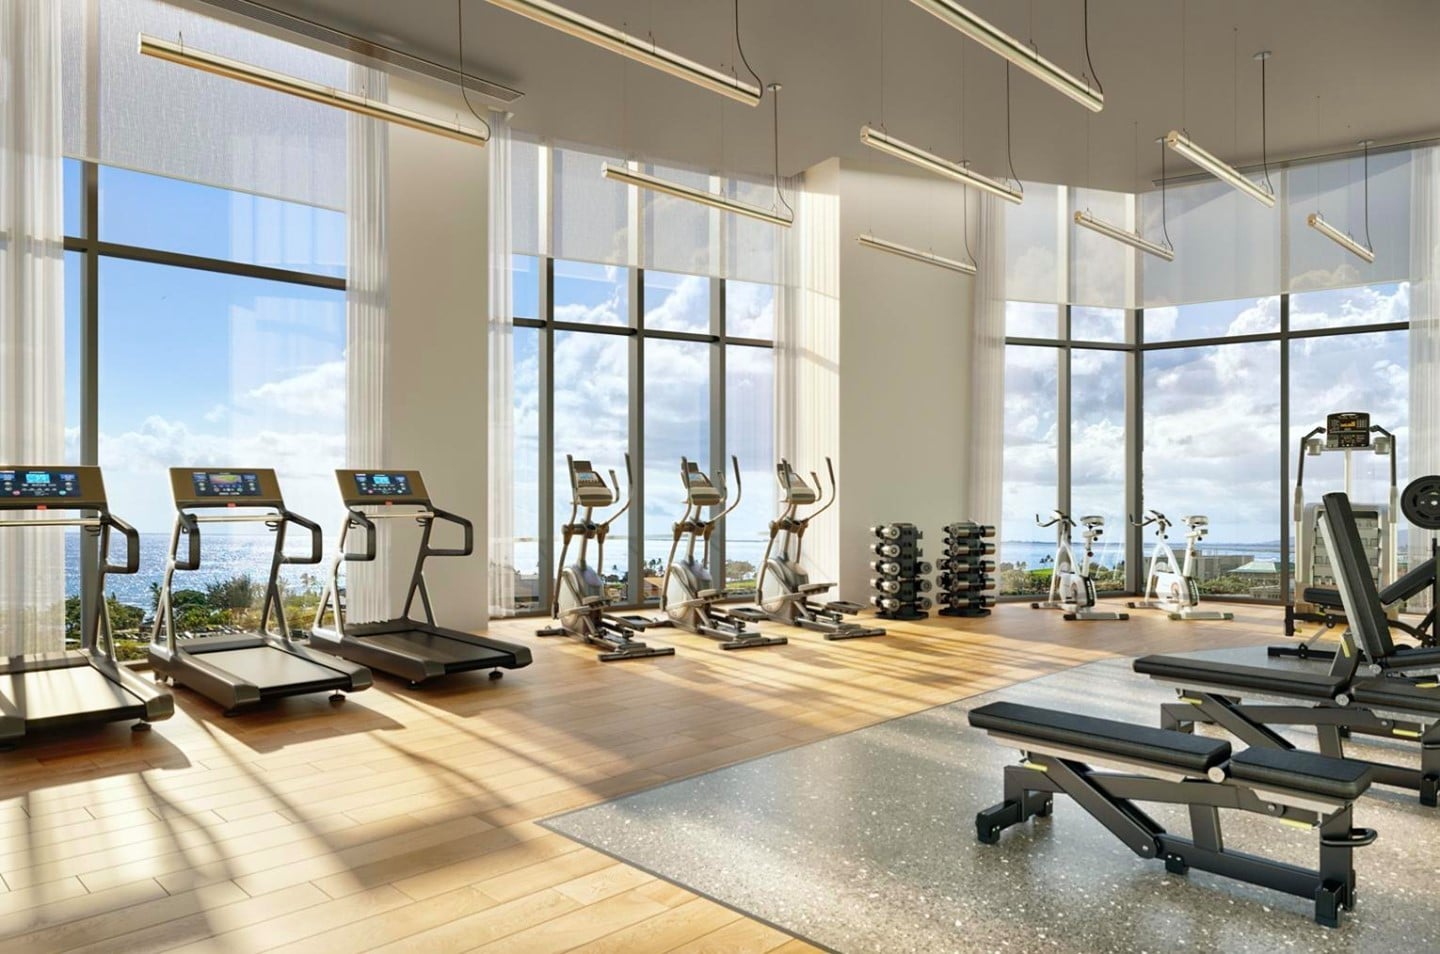 When you live at Kōʻula, you can expect workouts with a view. The indoor fitness center features beautiful ocean views, while a dedicated outdoor fitness pavilion allows you to enjoy the tradewinds.